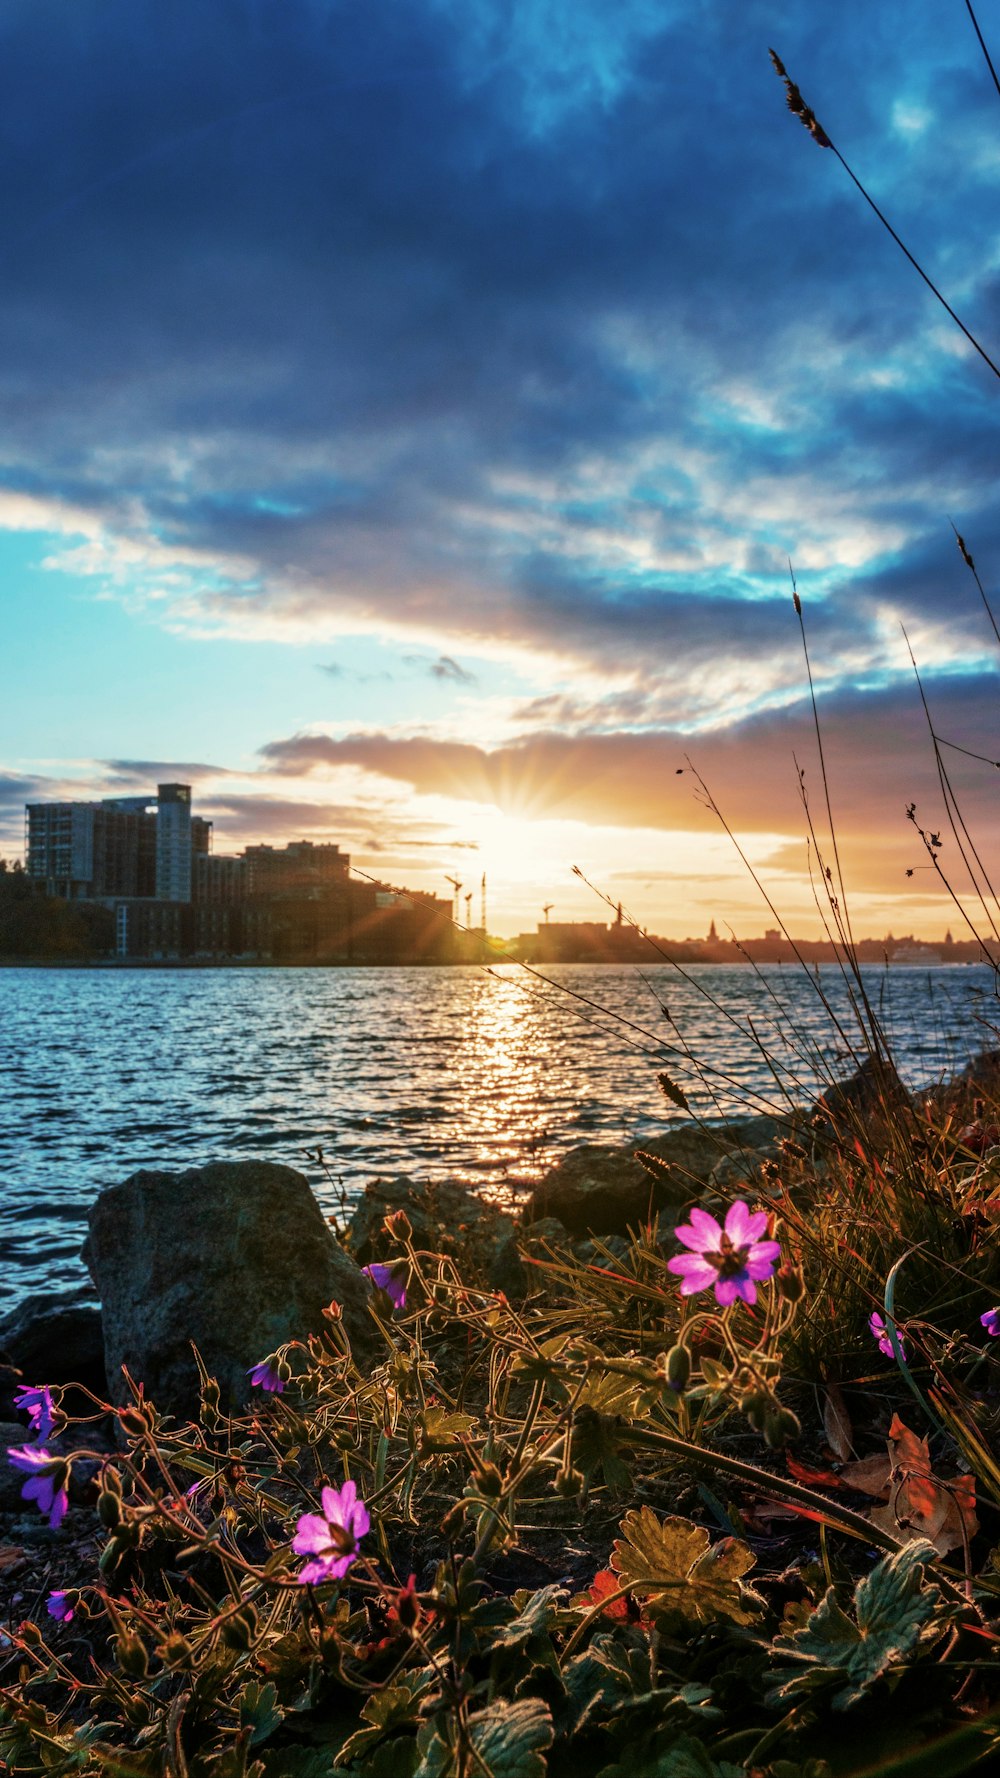 body of water near high-rise buildings with purple flowers under golden hour